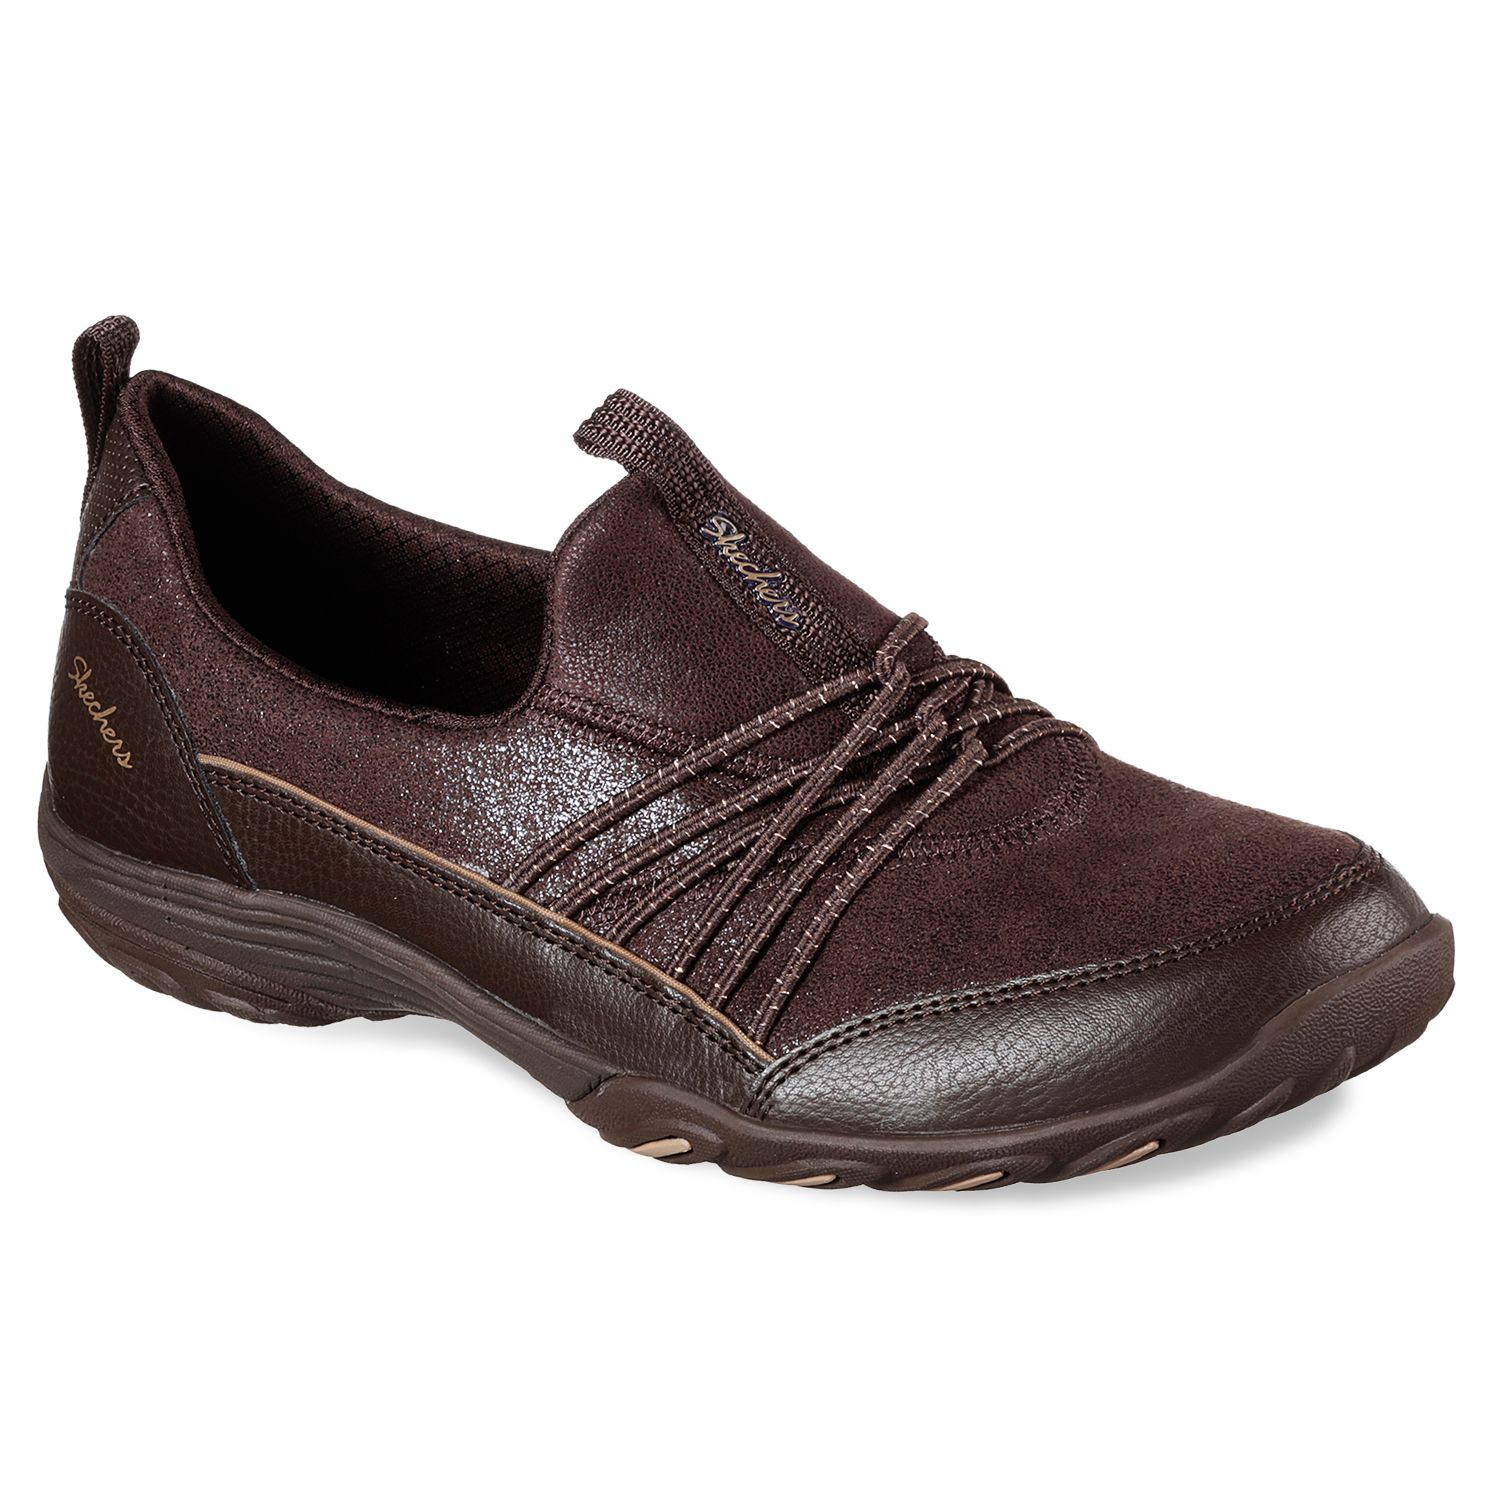 skechers empress let's be real women's shoes